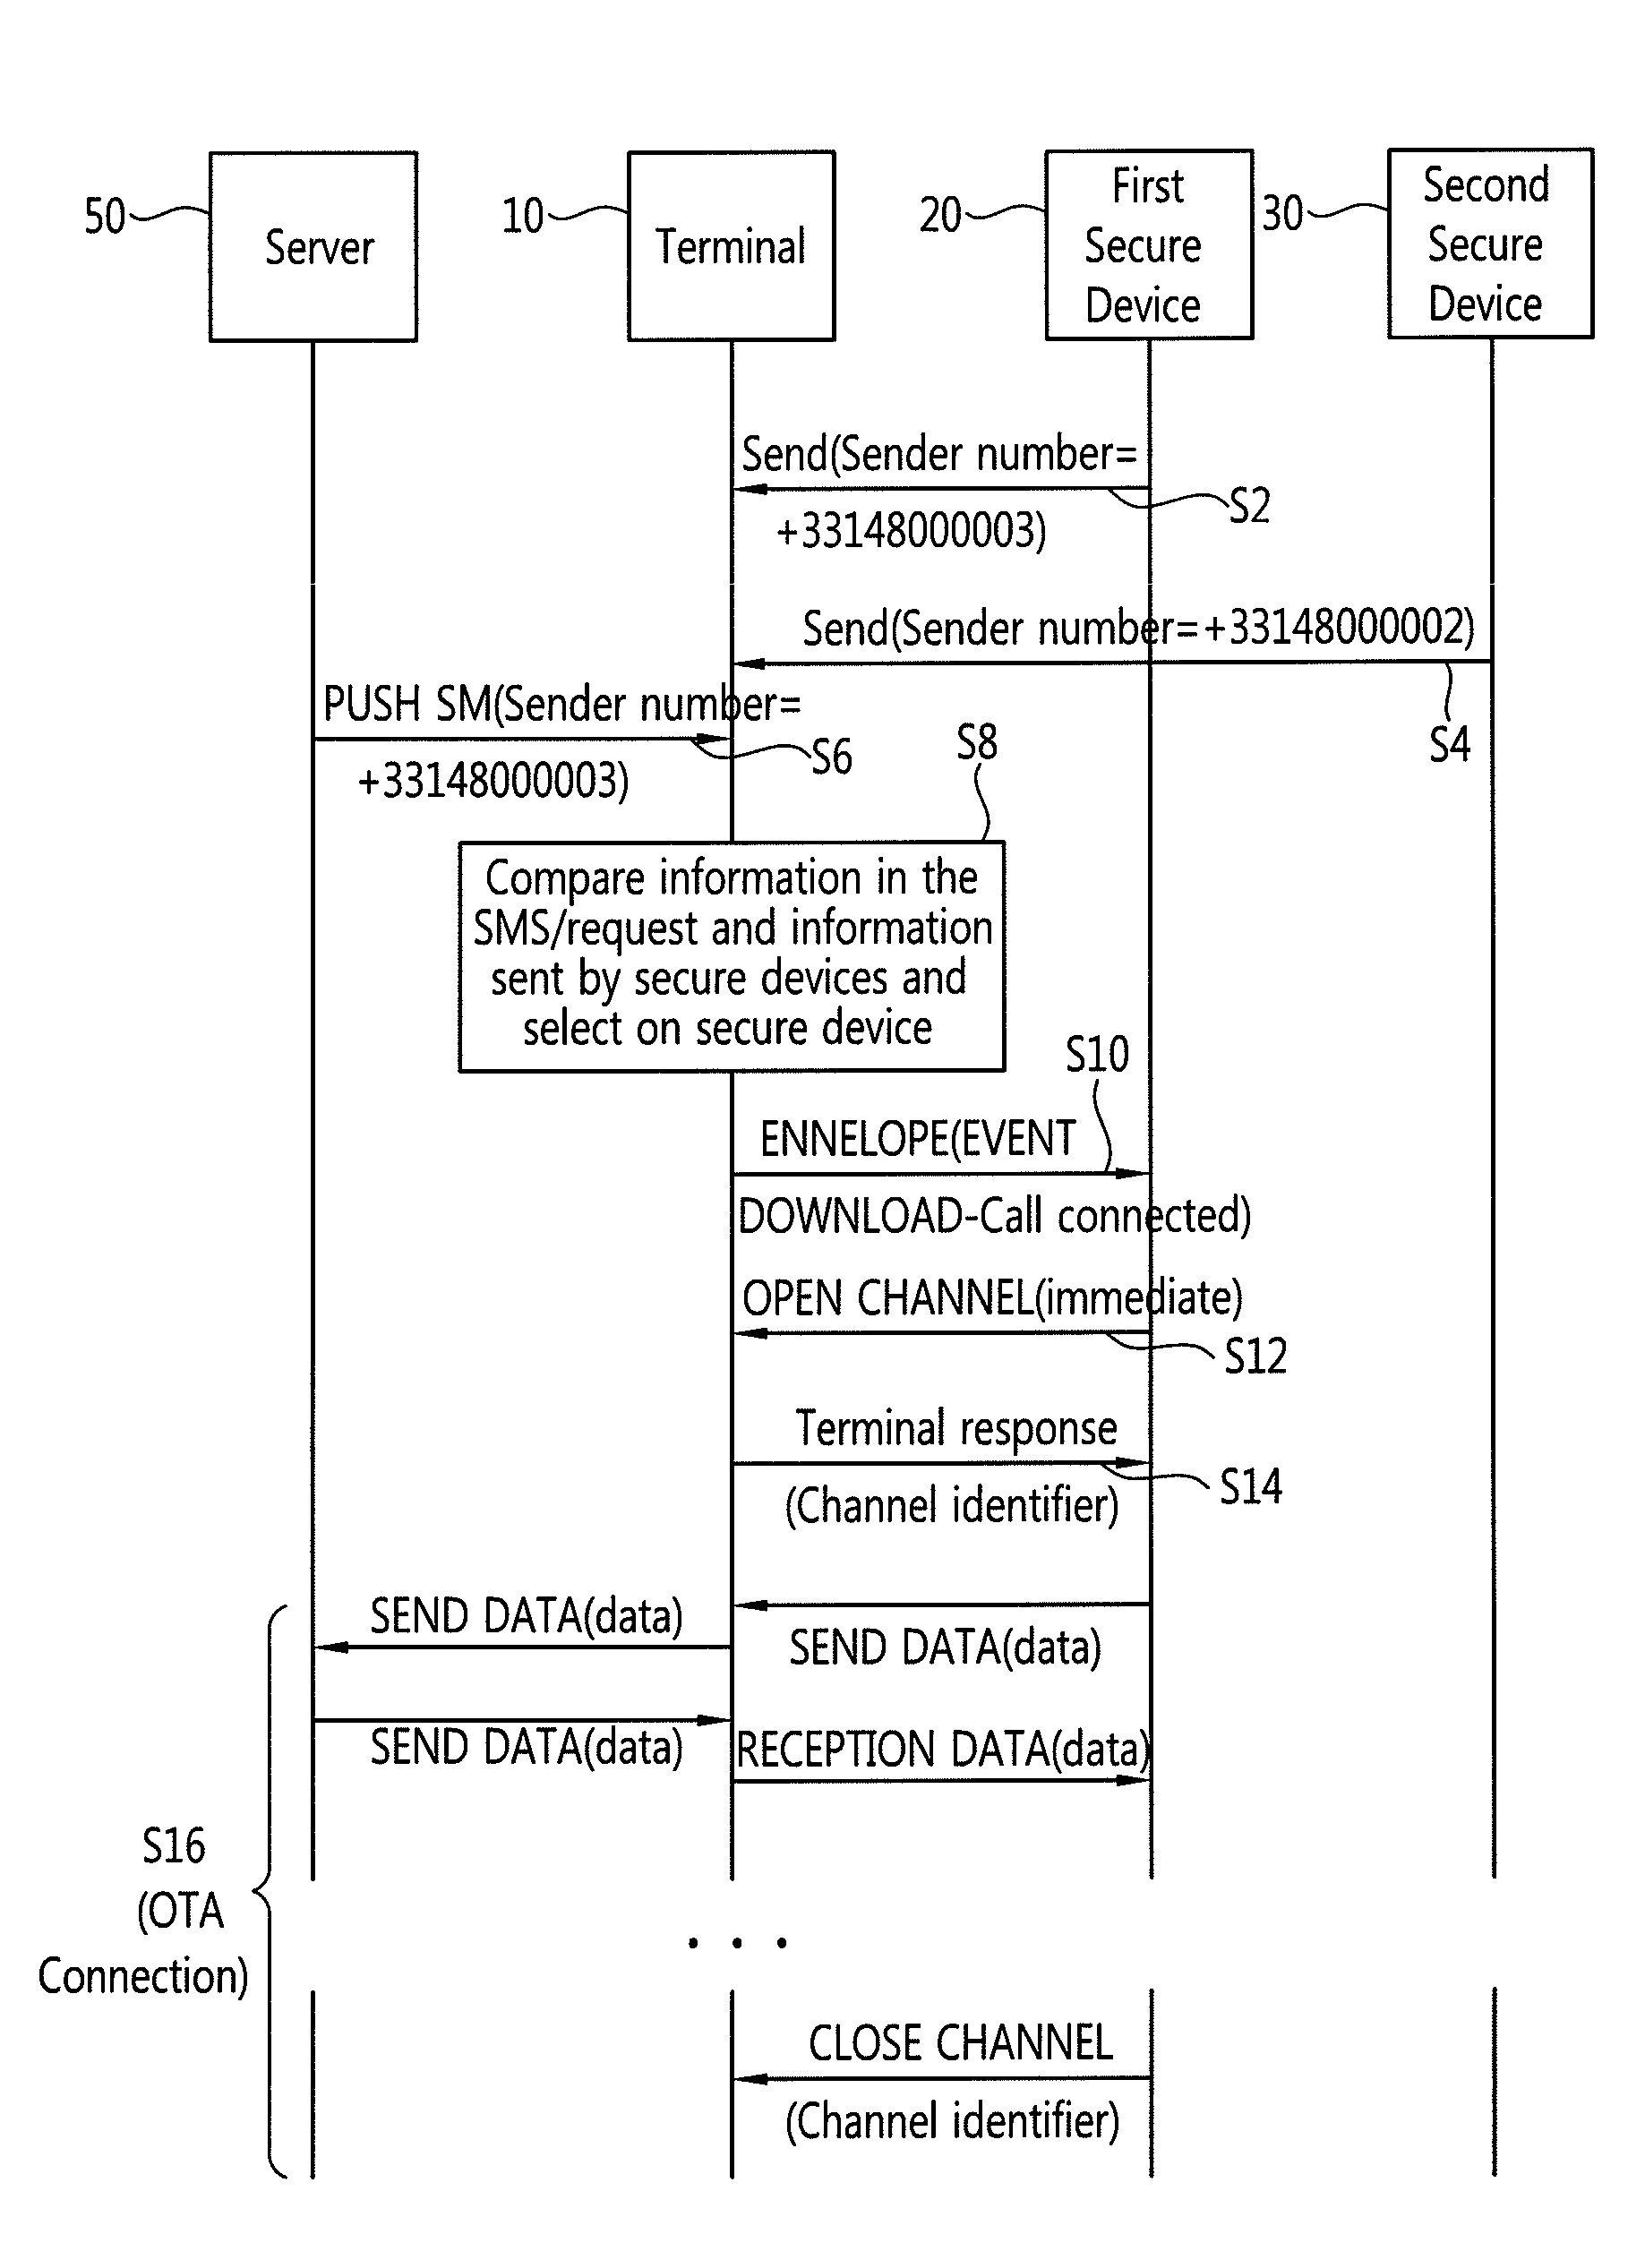 Terminal and method for selecting secure device